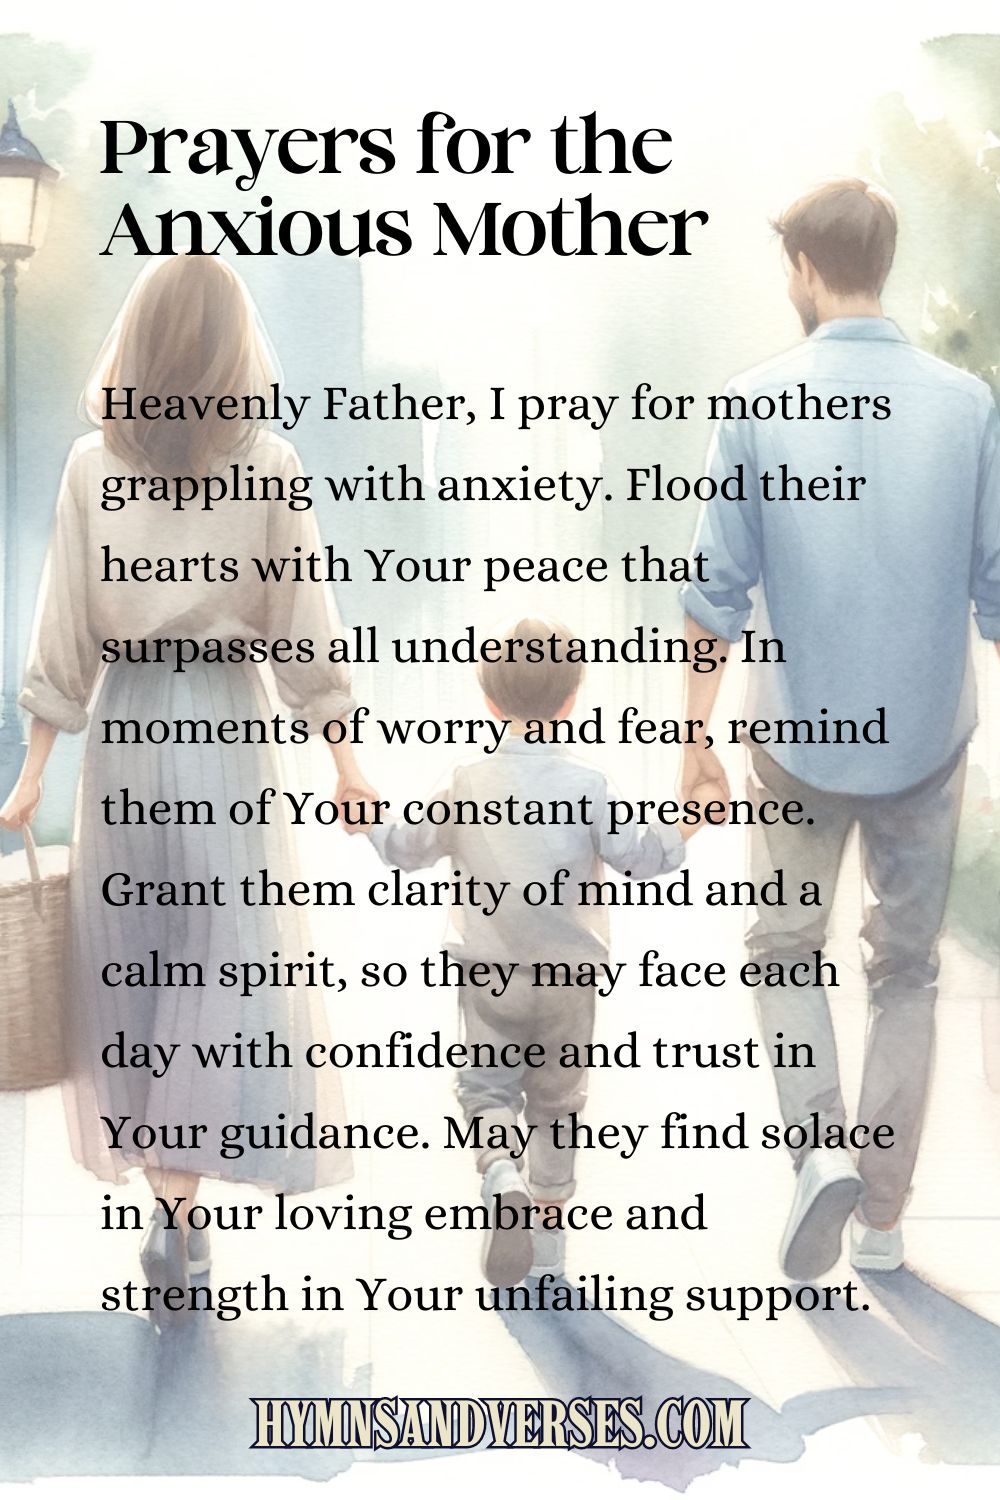 Pin image for Prayers for the Anxious Mother, reads: Heavenly Father, I pray for mothers grappling with anxiety. Flood their hearts with Your peace that surpasses all understanding. In moments of worry and fear, remind them of Your constant presence. Grant them clarity of mind and a calm spirit, so they may face each day with confidence and trust in Your guidance. May they find solace in Your loving embrace and strength in Your unfailing support.